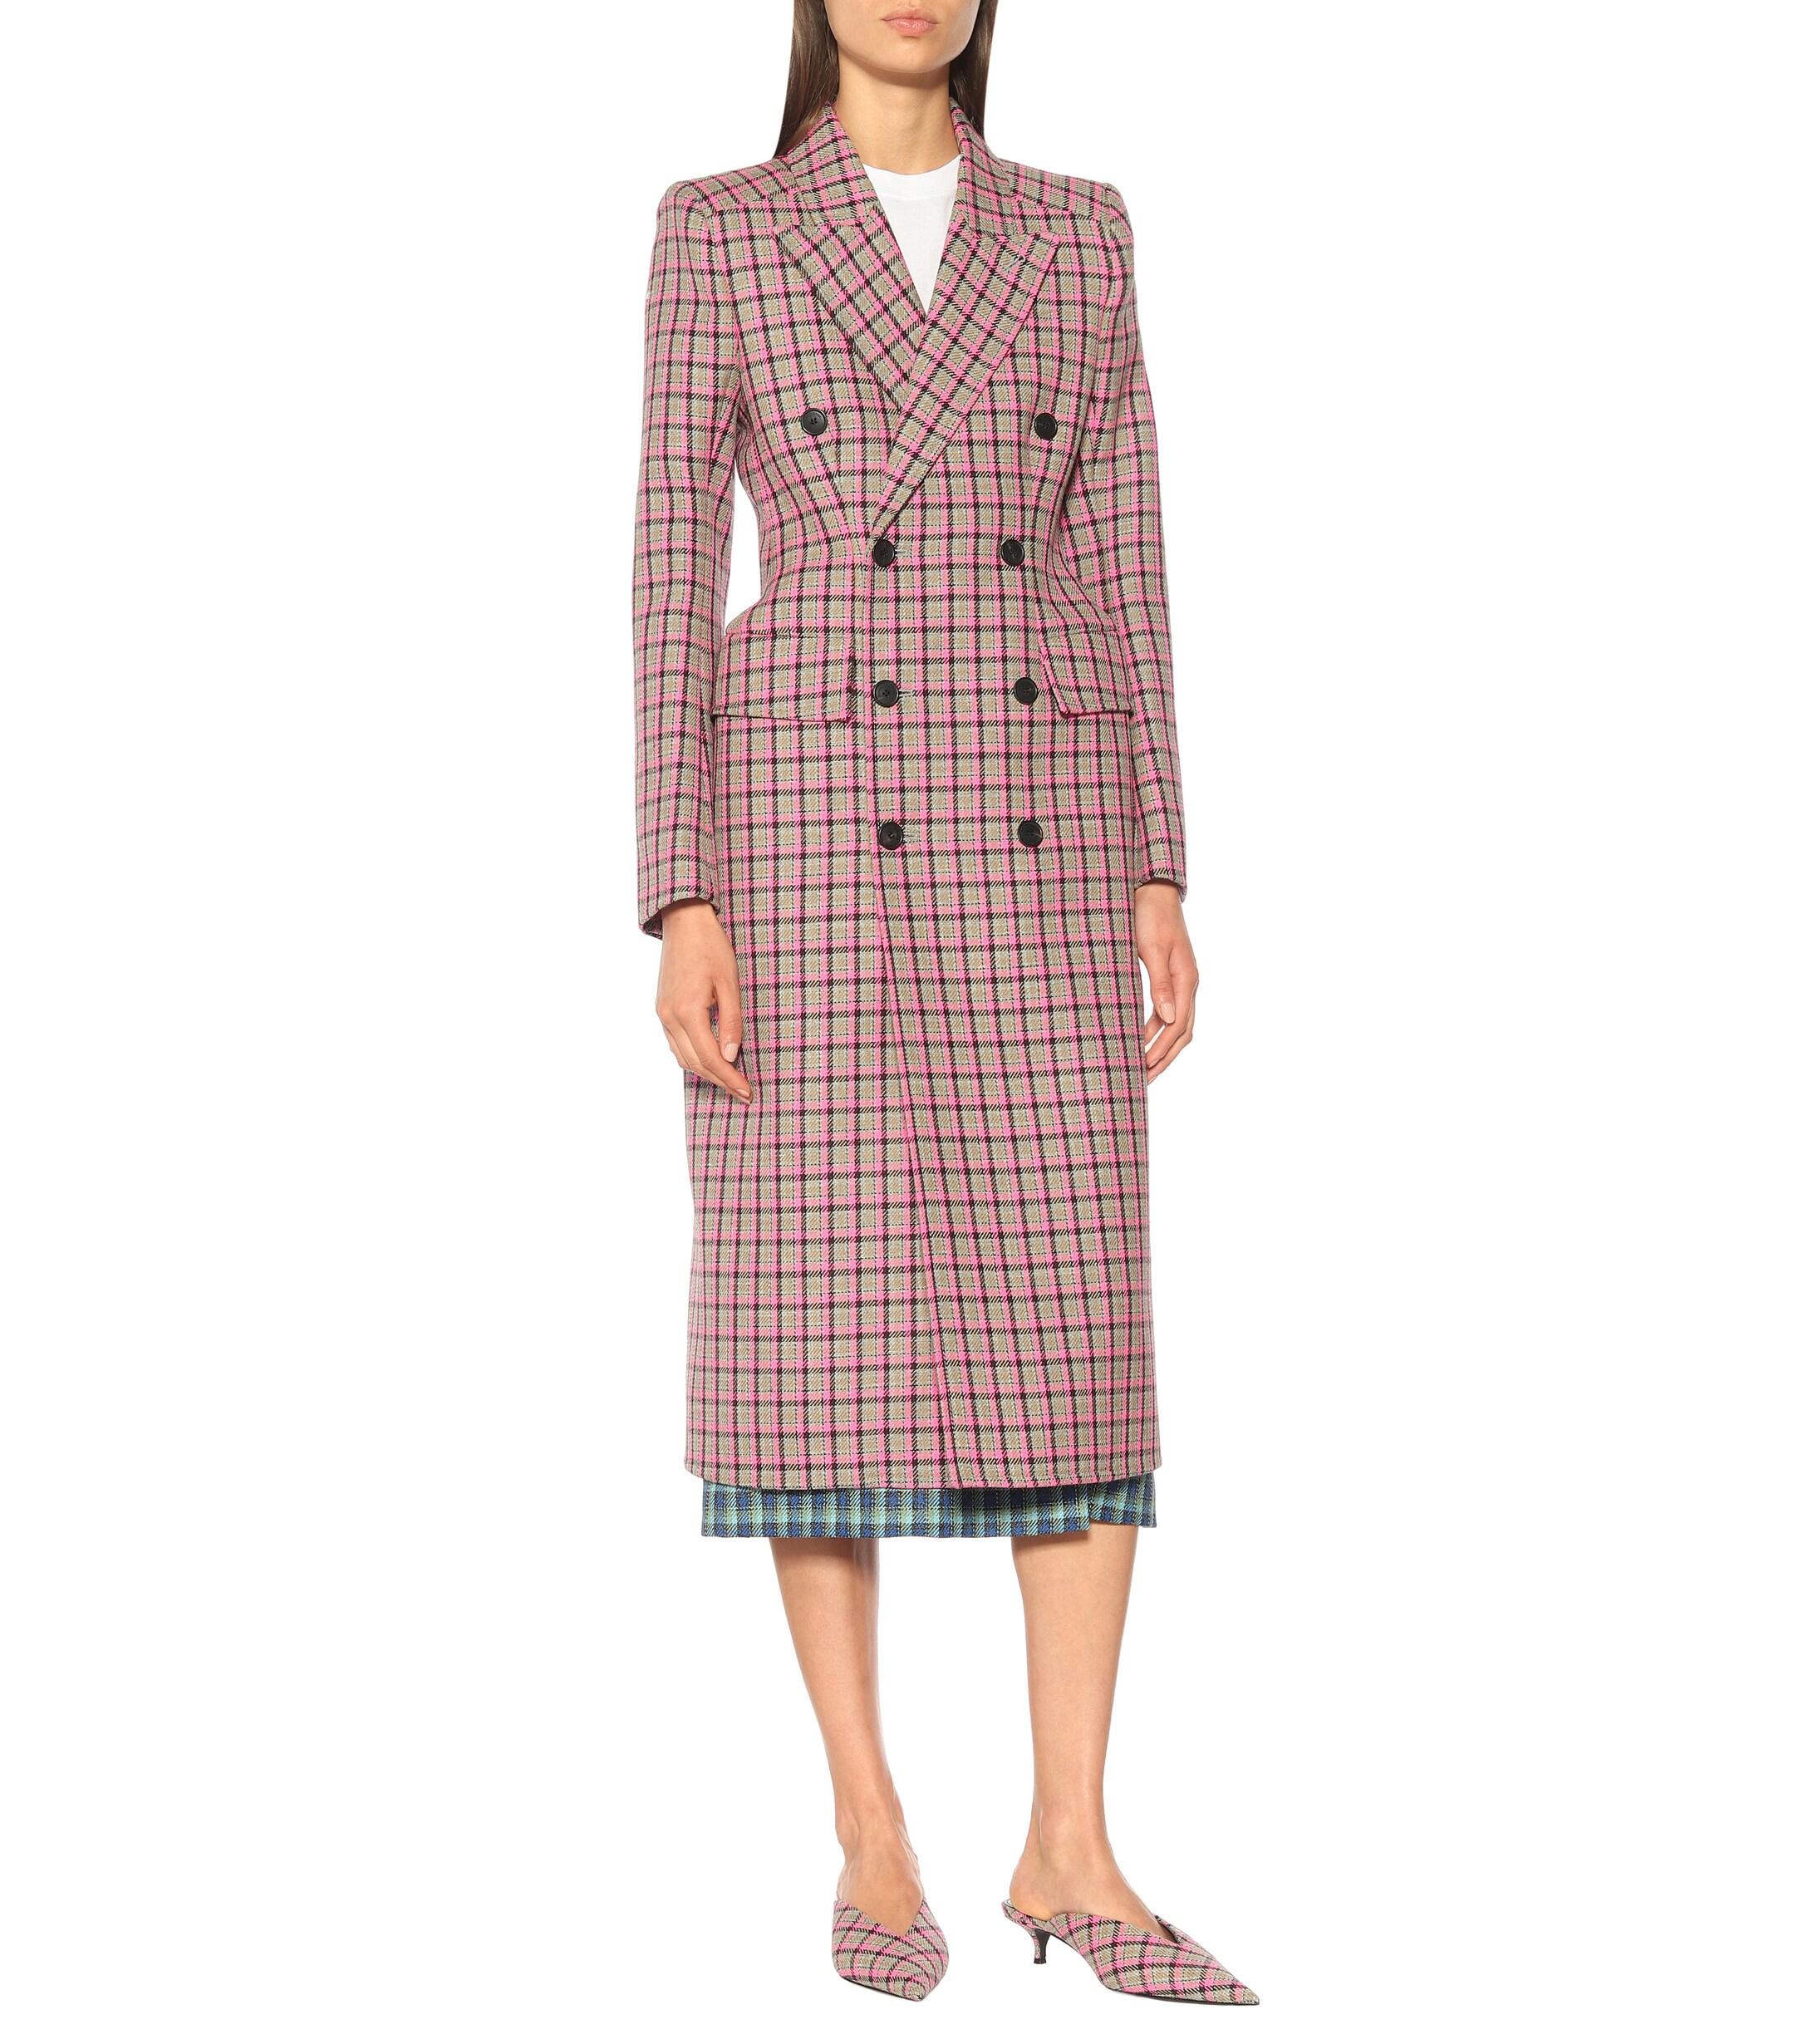 Balenciaga Hourglass Checked Wool Coat in Pink - Lyst